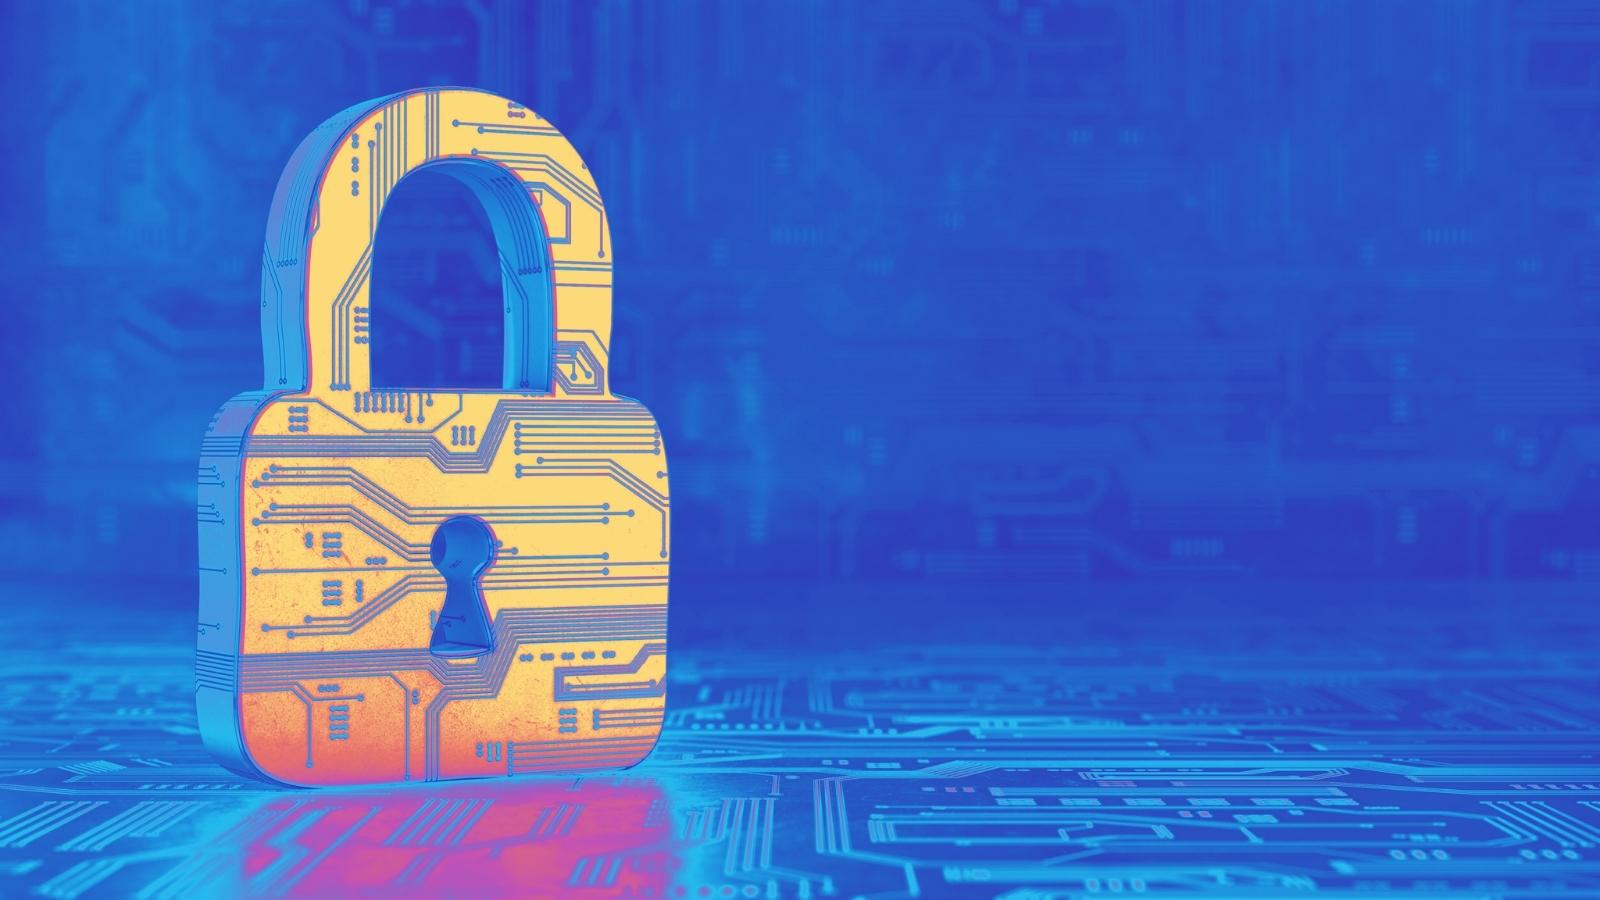 a digitized padlock to represent cybersecurity